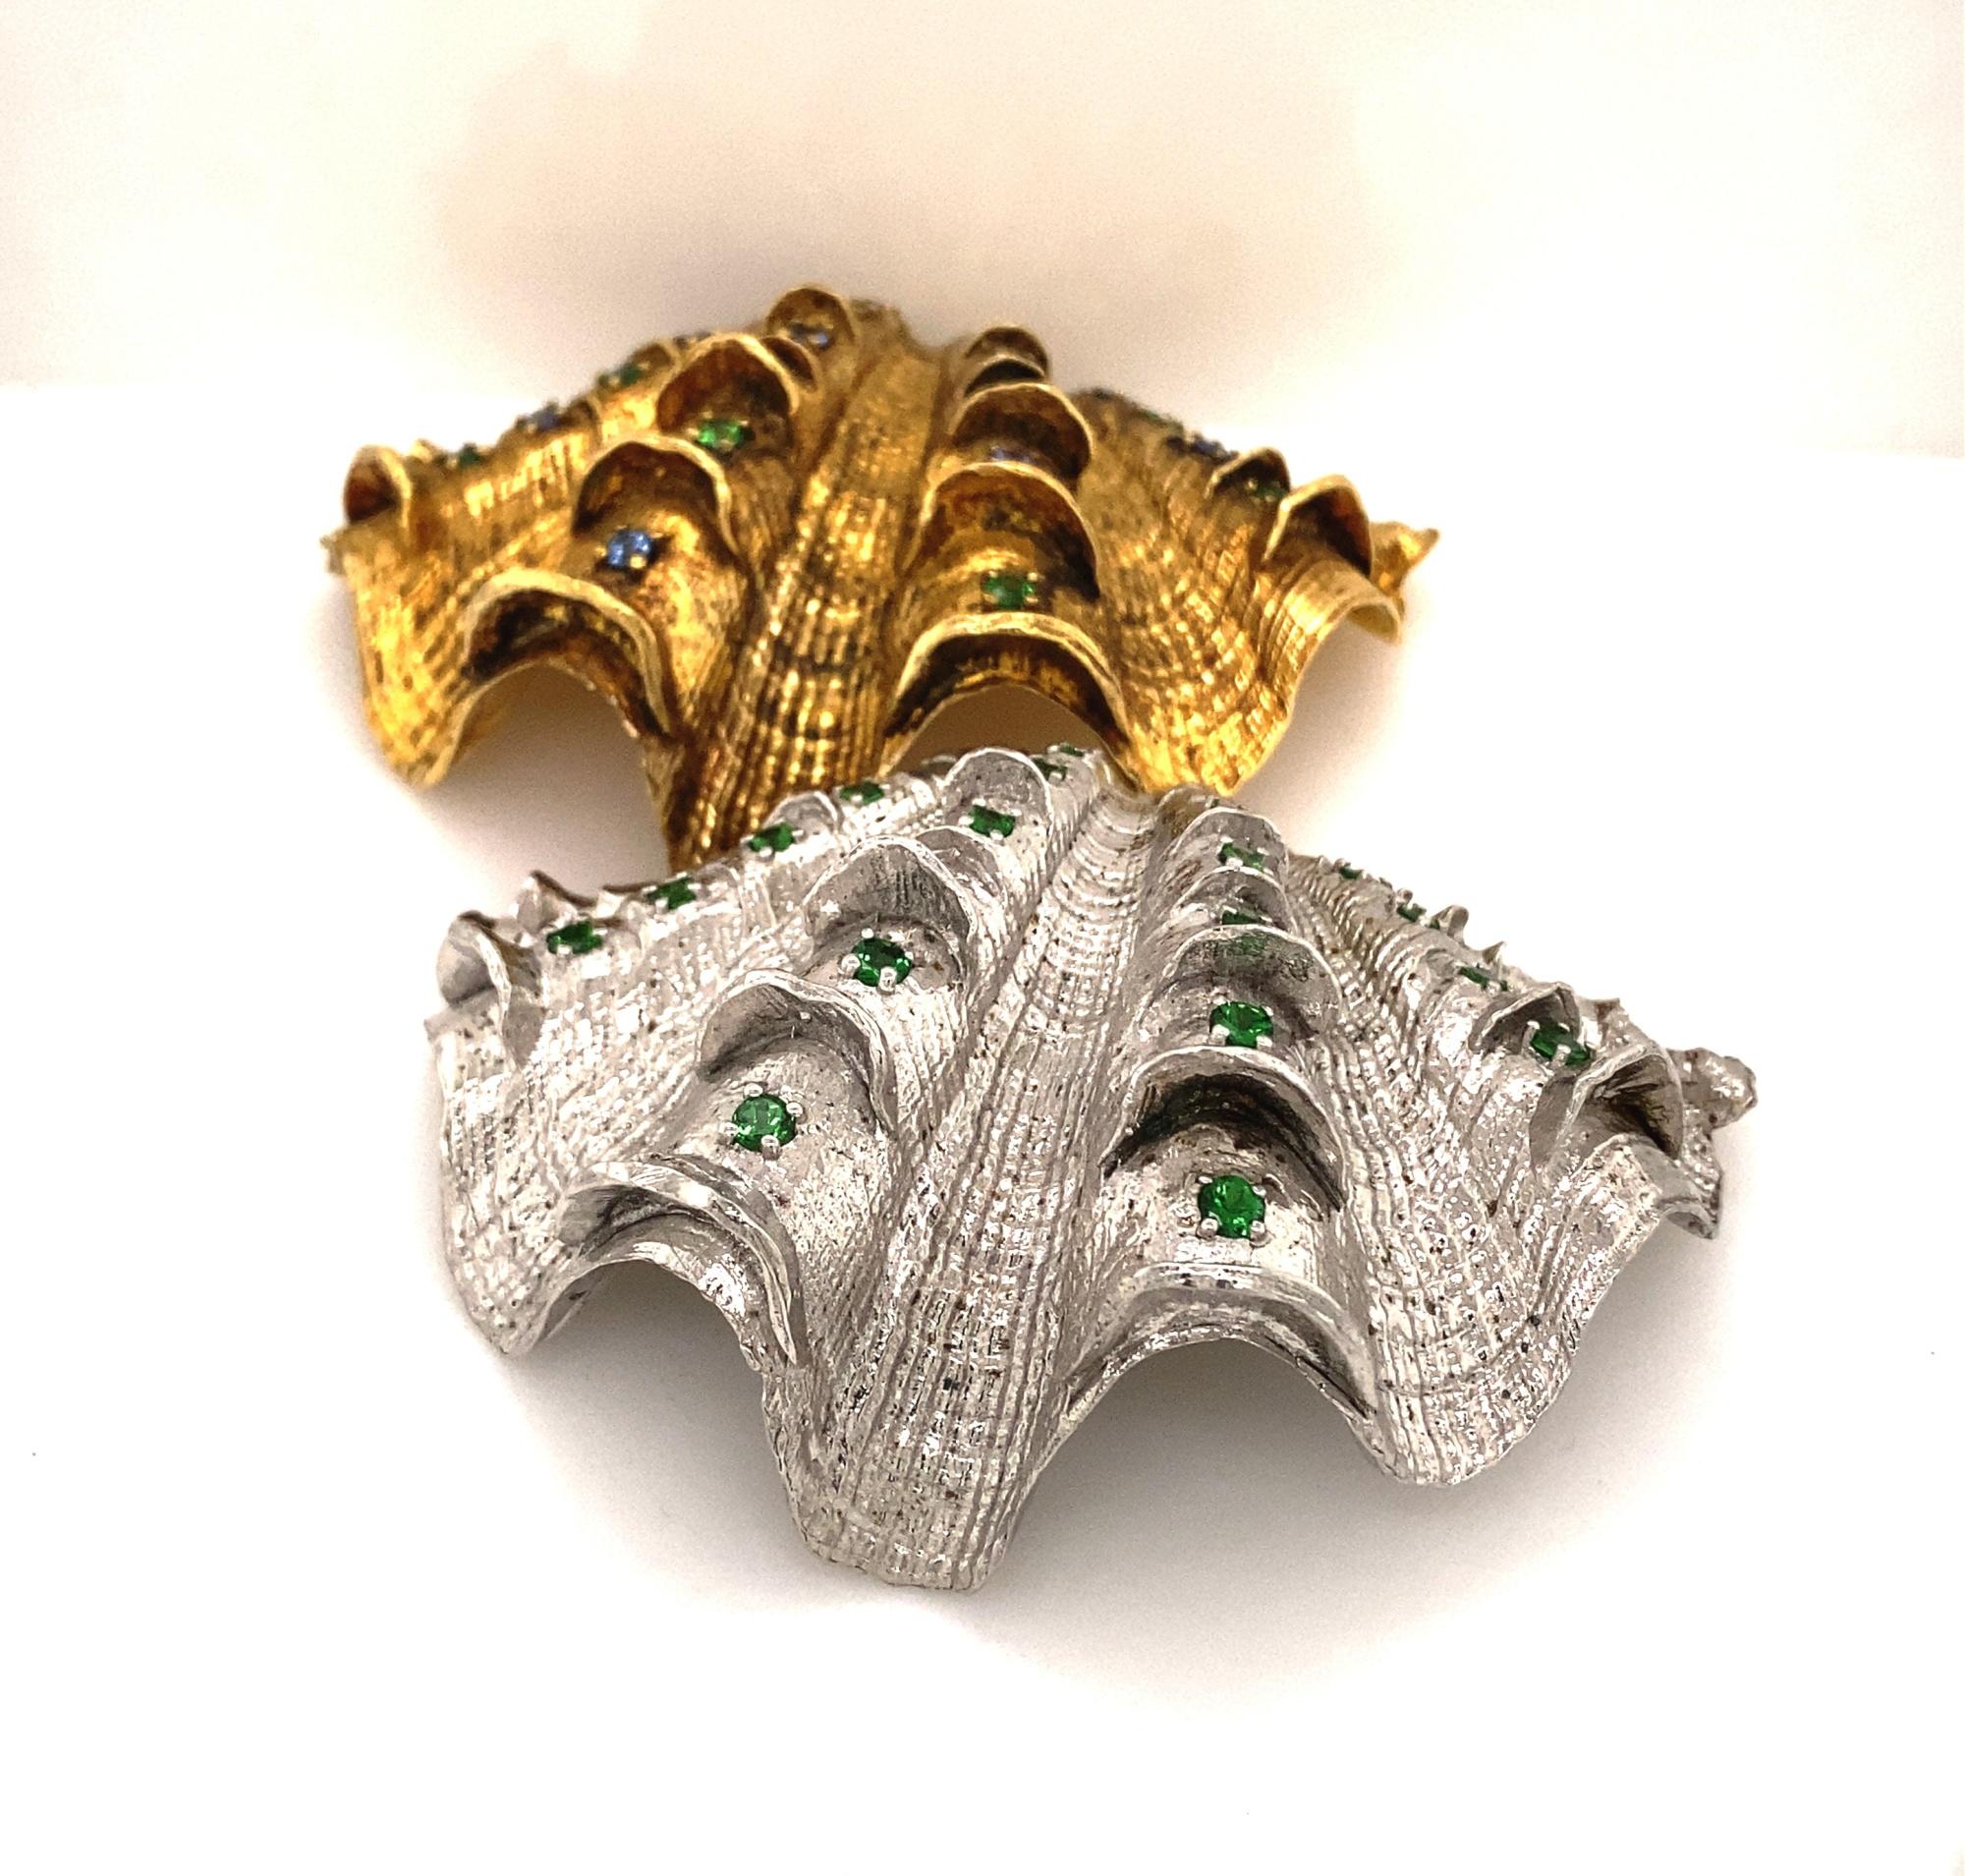 Paolo Costagli Sterling Silver Gilt Shells With Sapphires Tsavorite Garnets.  This is a beautiful pair of shells by important artist Paolo Costagli. One shell has 2 carats of Tsavorite Garnets the other has 2 carats of alternating blue sapphires and